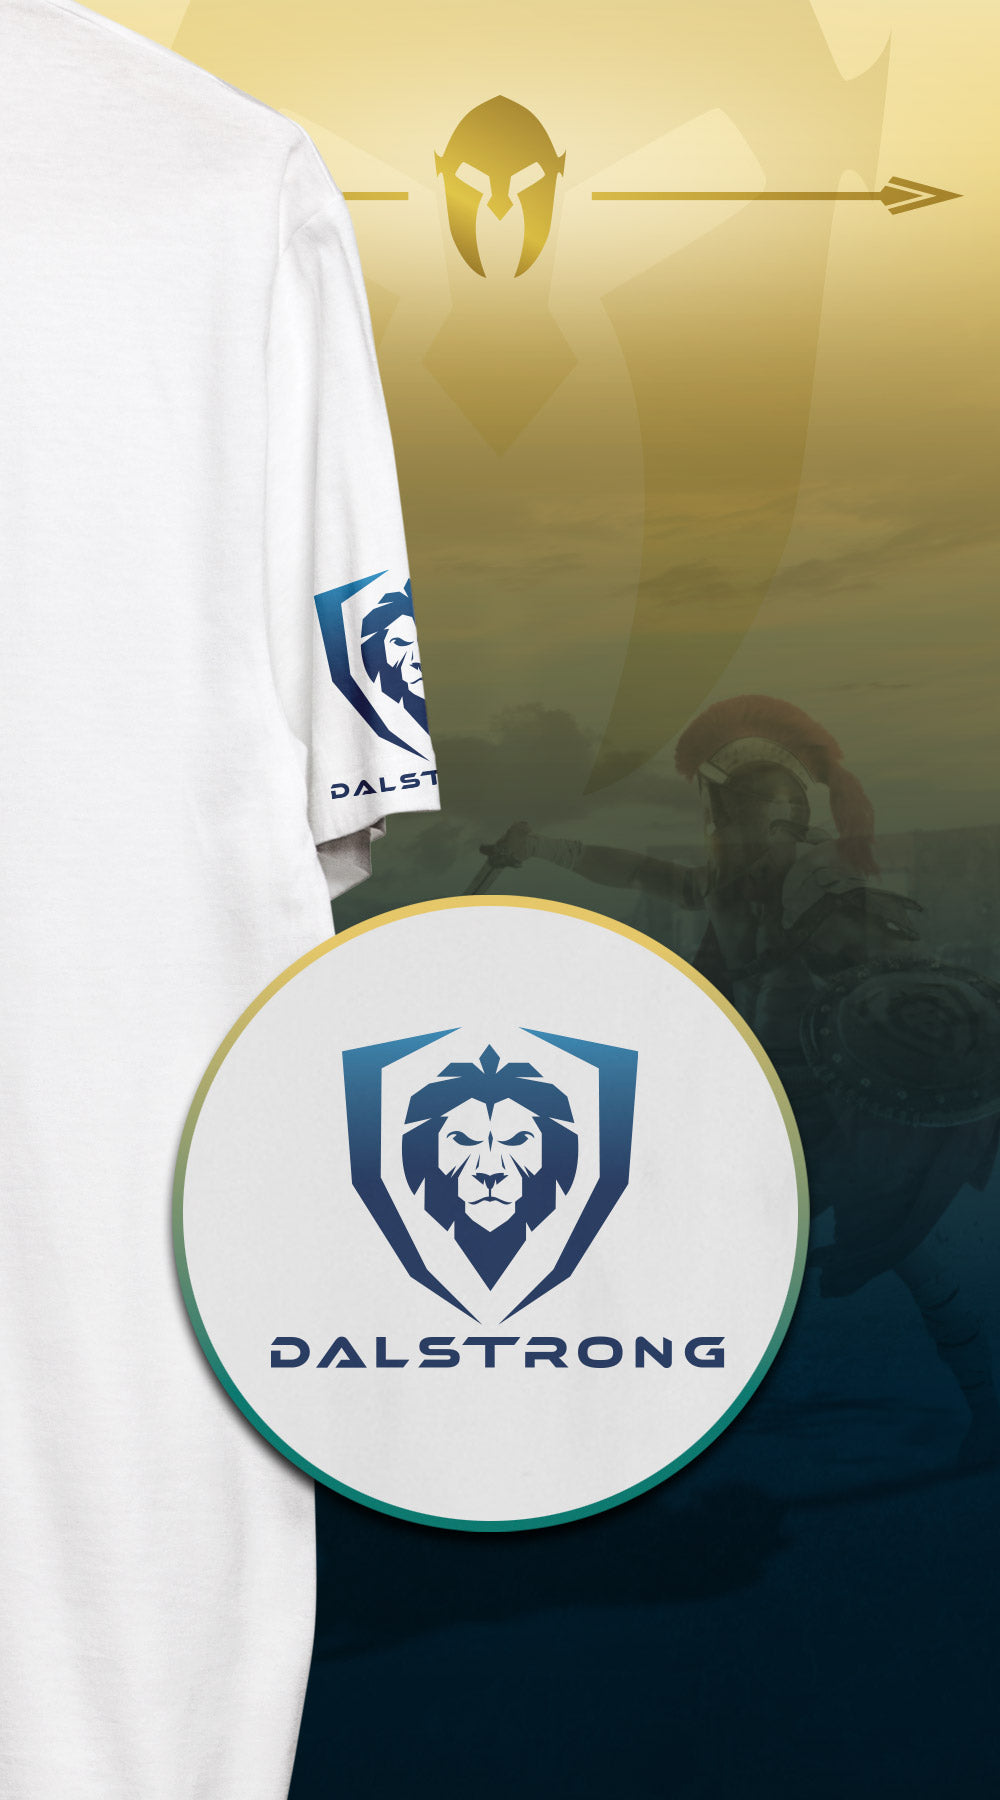 Dalstrong beast mode on tee white with dalstrong name and logo.